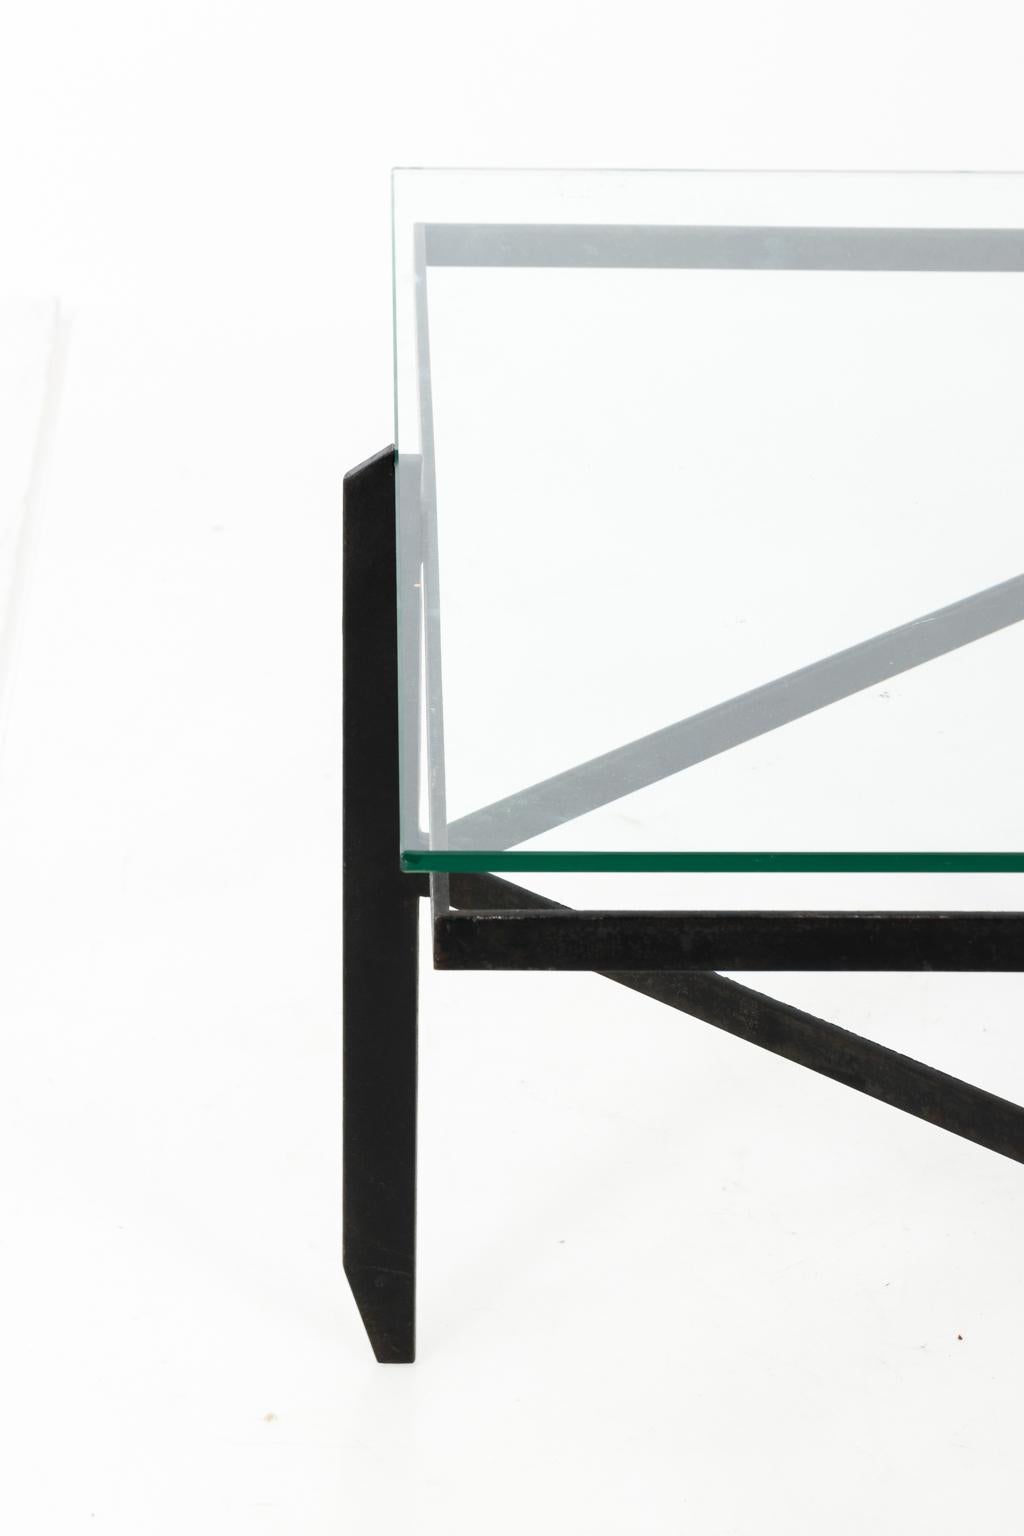 Mid-Century Modern style Iron frame coffee table with glass top, circa 1950.
 